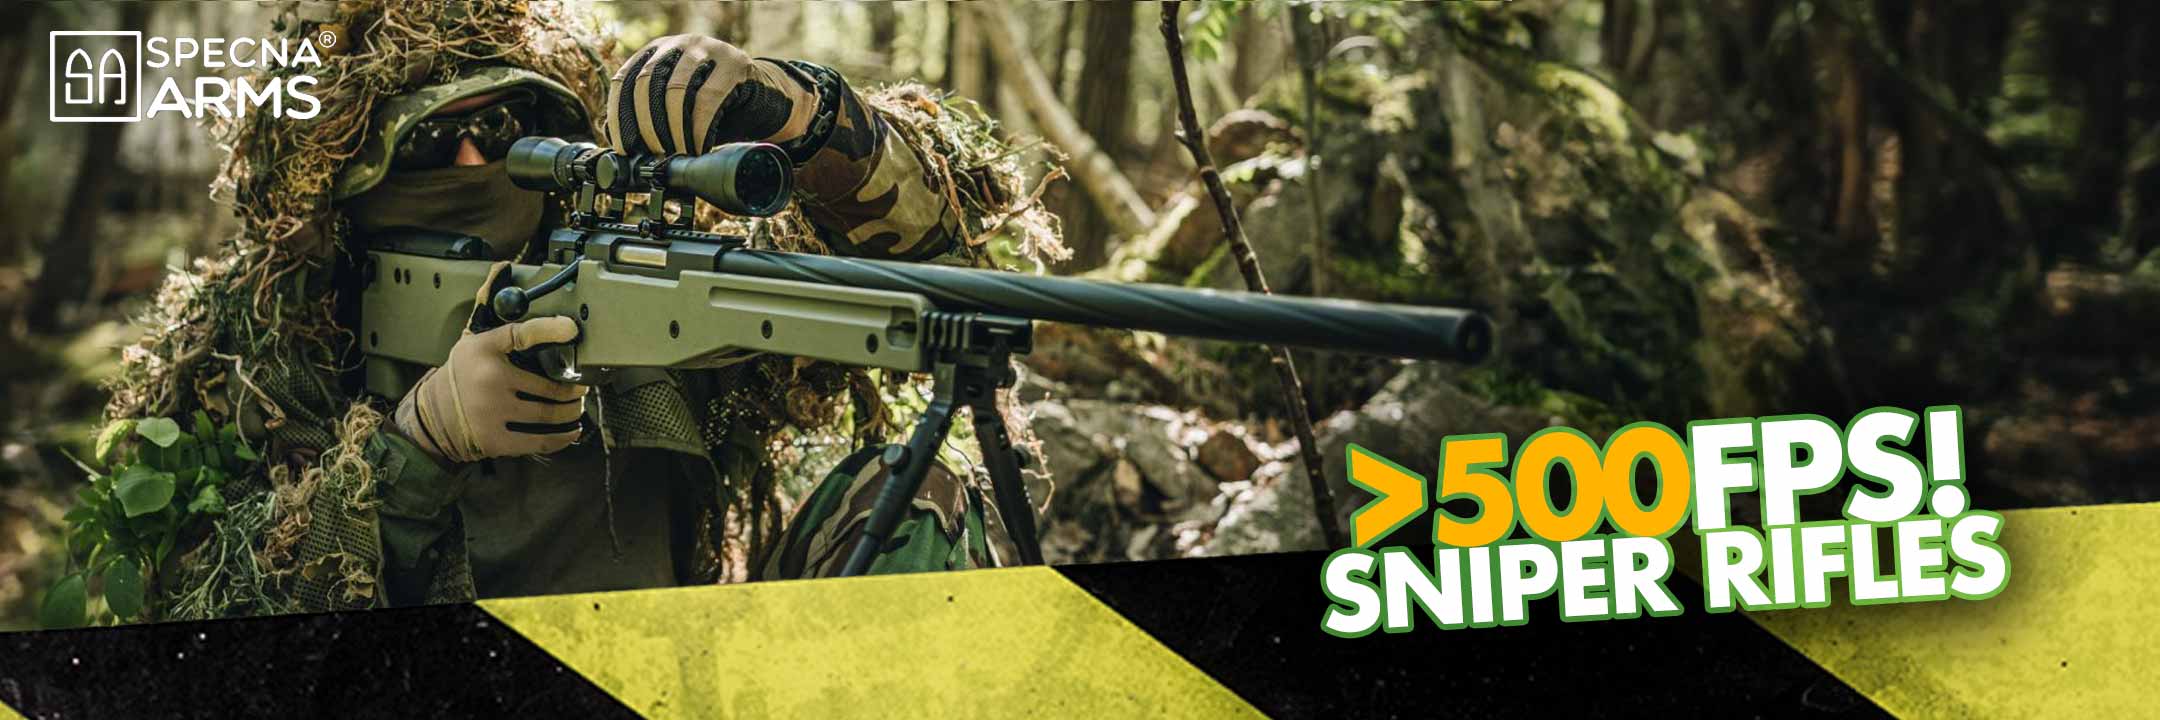 Airsoft Sniper rifles with more than 500 FPS out of the box